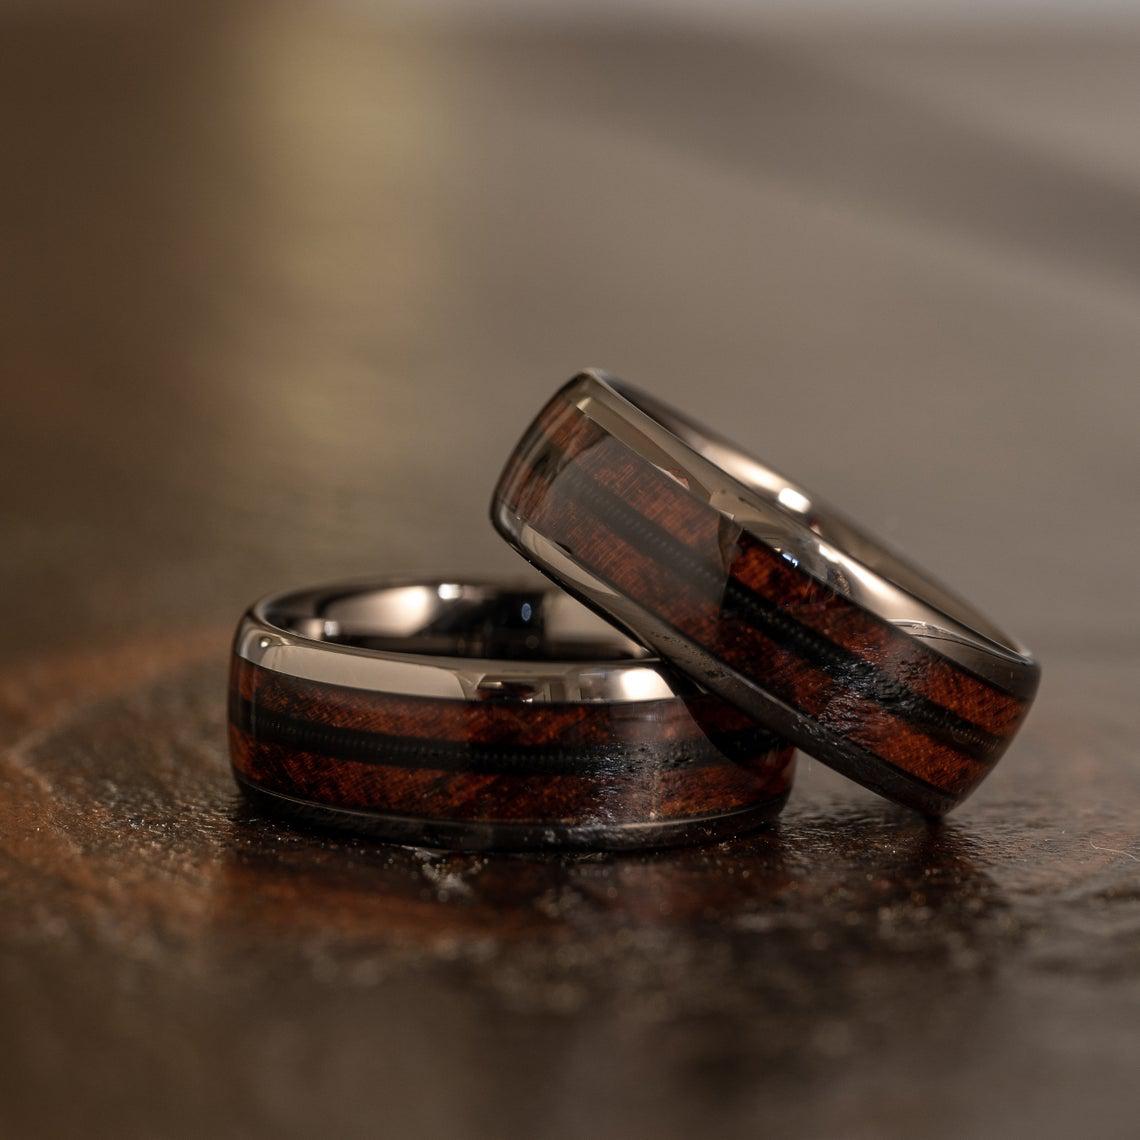 Wedding Ring Has Meaning Unlimited Bond Stock Photo 2347306635 |  Shutterstock